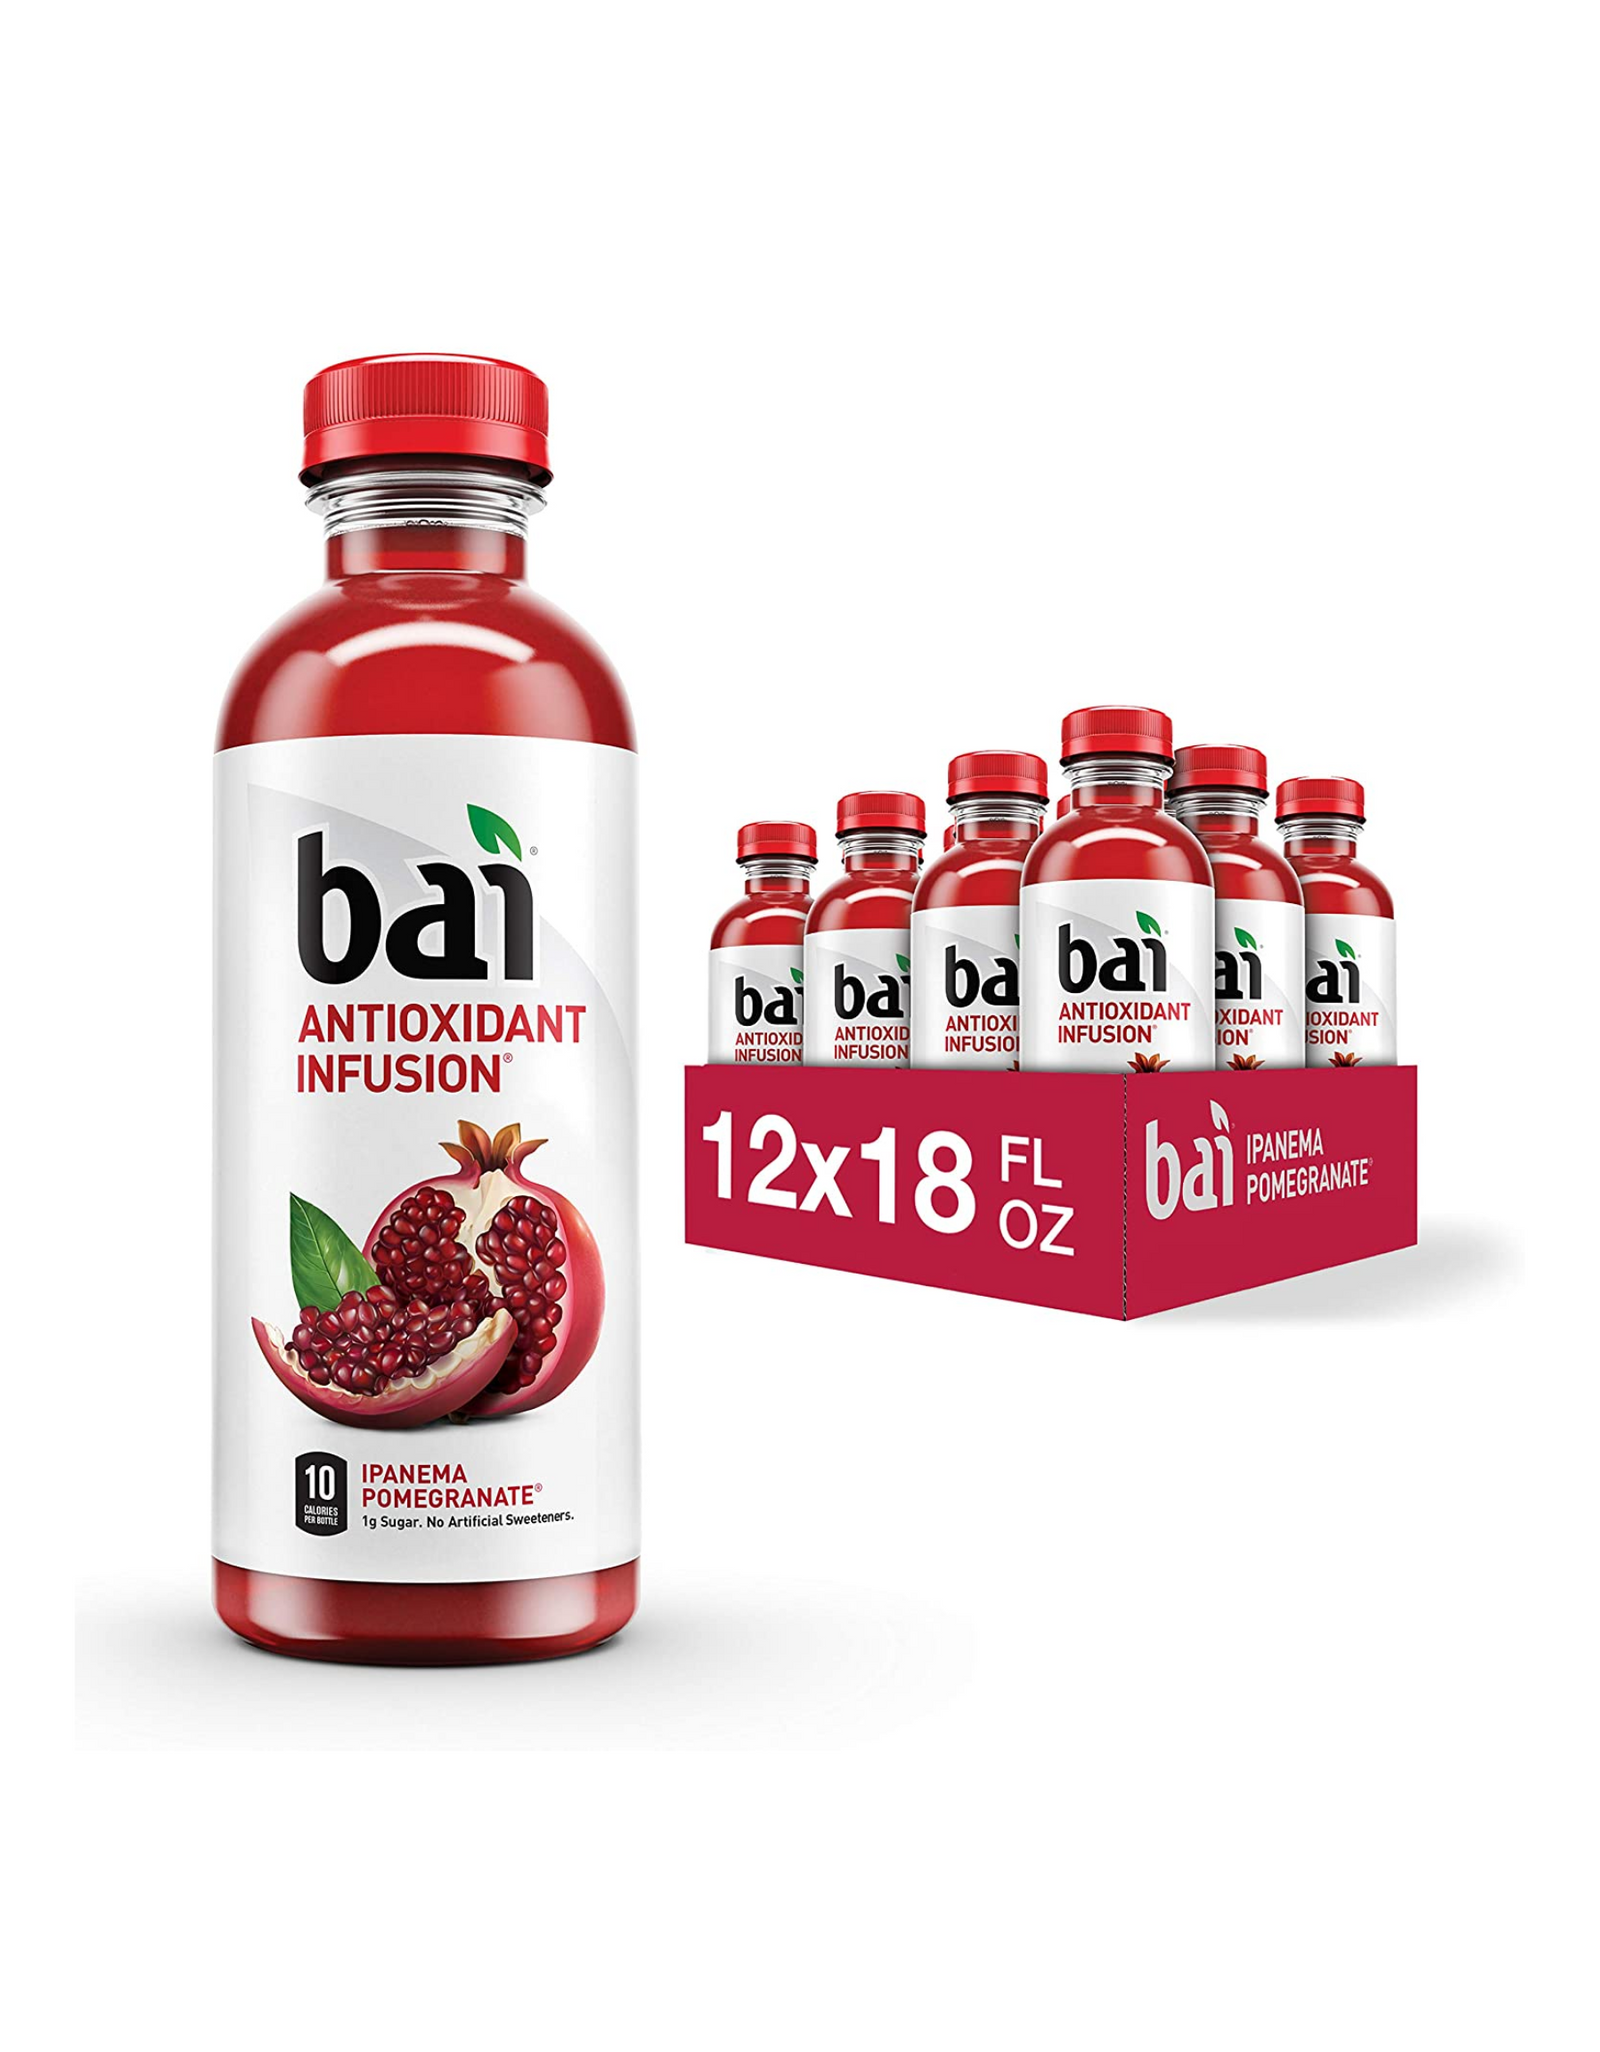 Bai Flavored Water, Antioxidant Infused Drinks, Ipanema Pomegranate, 18 fl oz (Pack of 12)